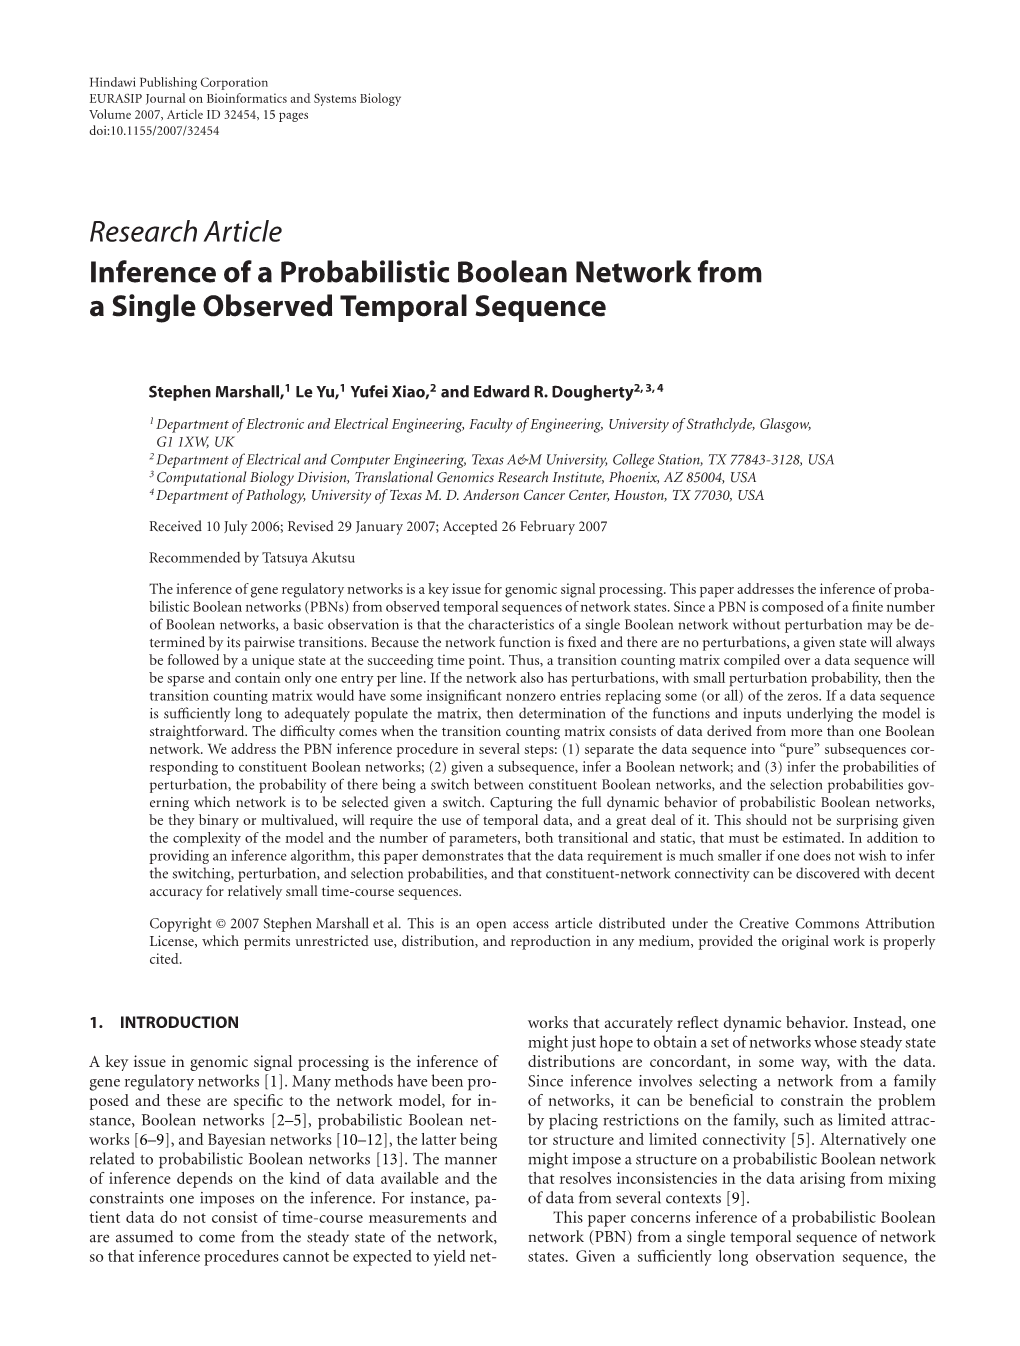 Inference of a Probabilistic Boolean Network from a Single Observed Temporal Sequence